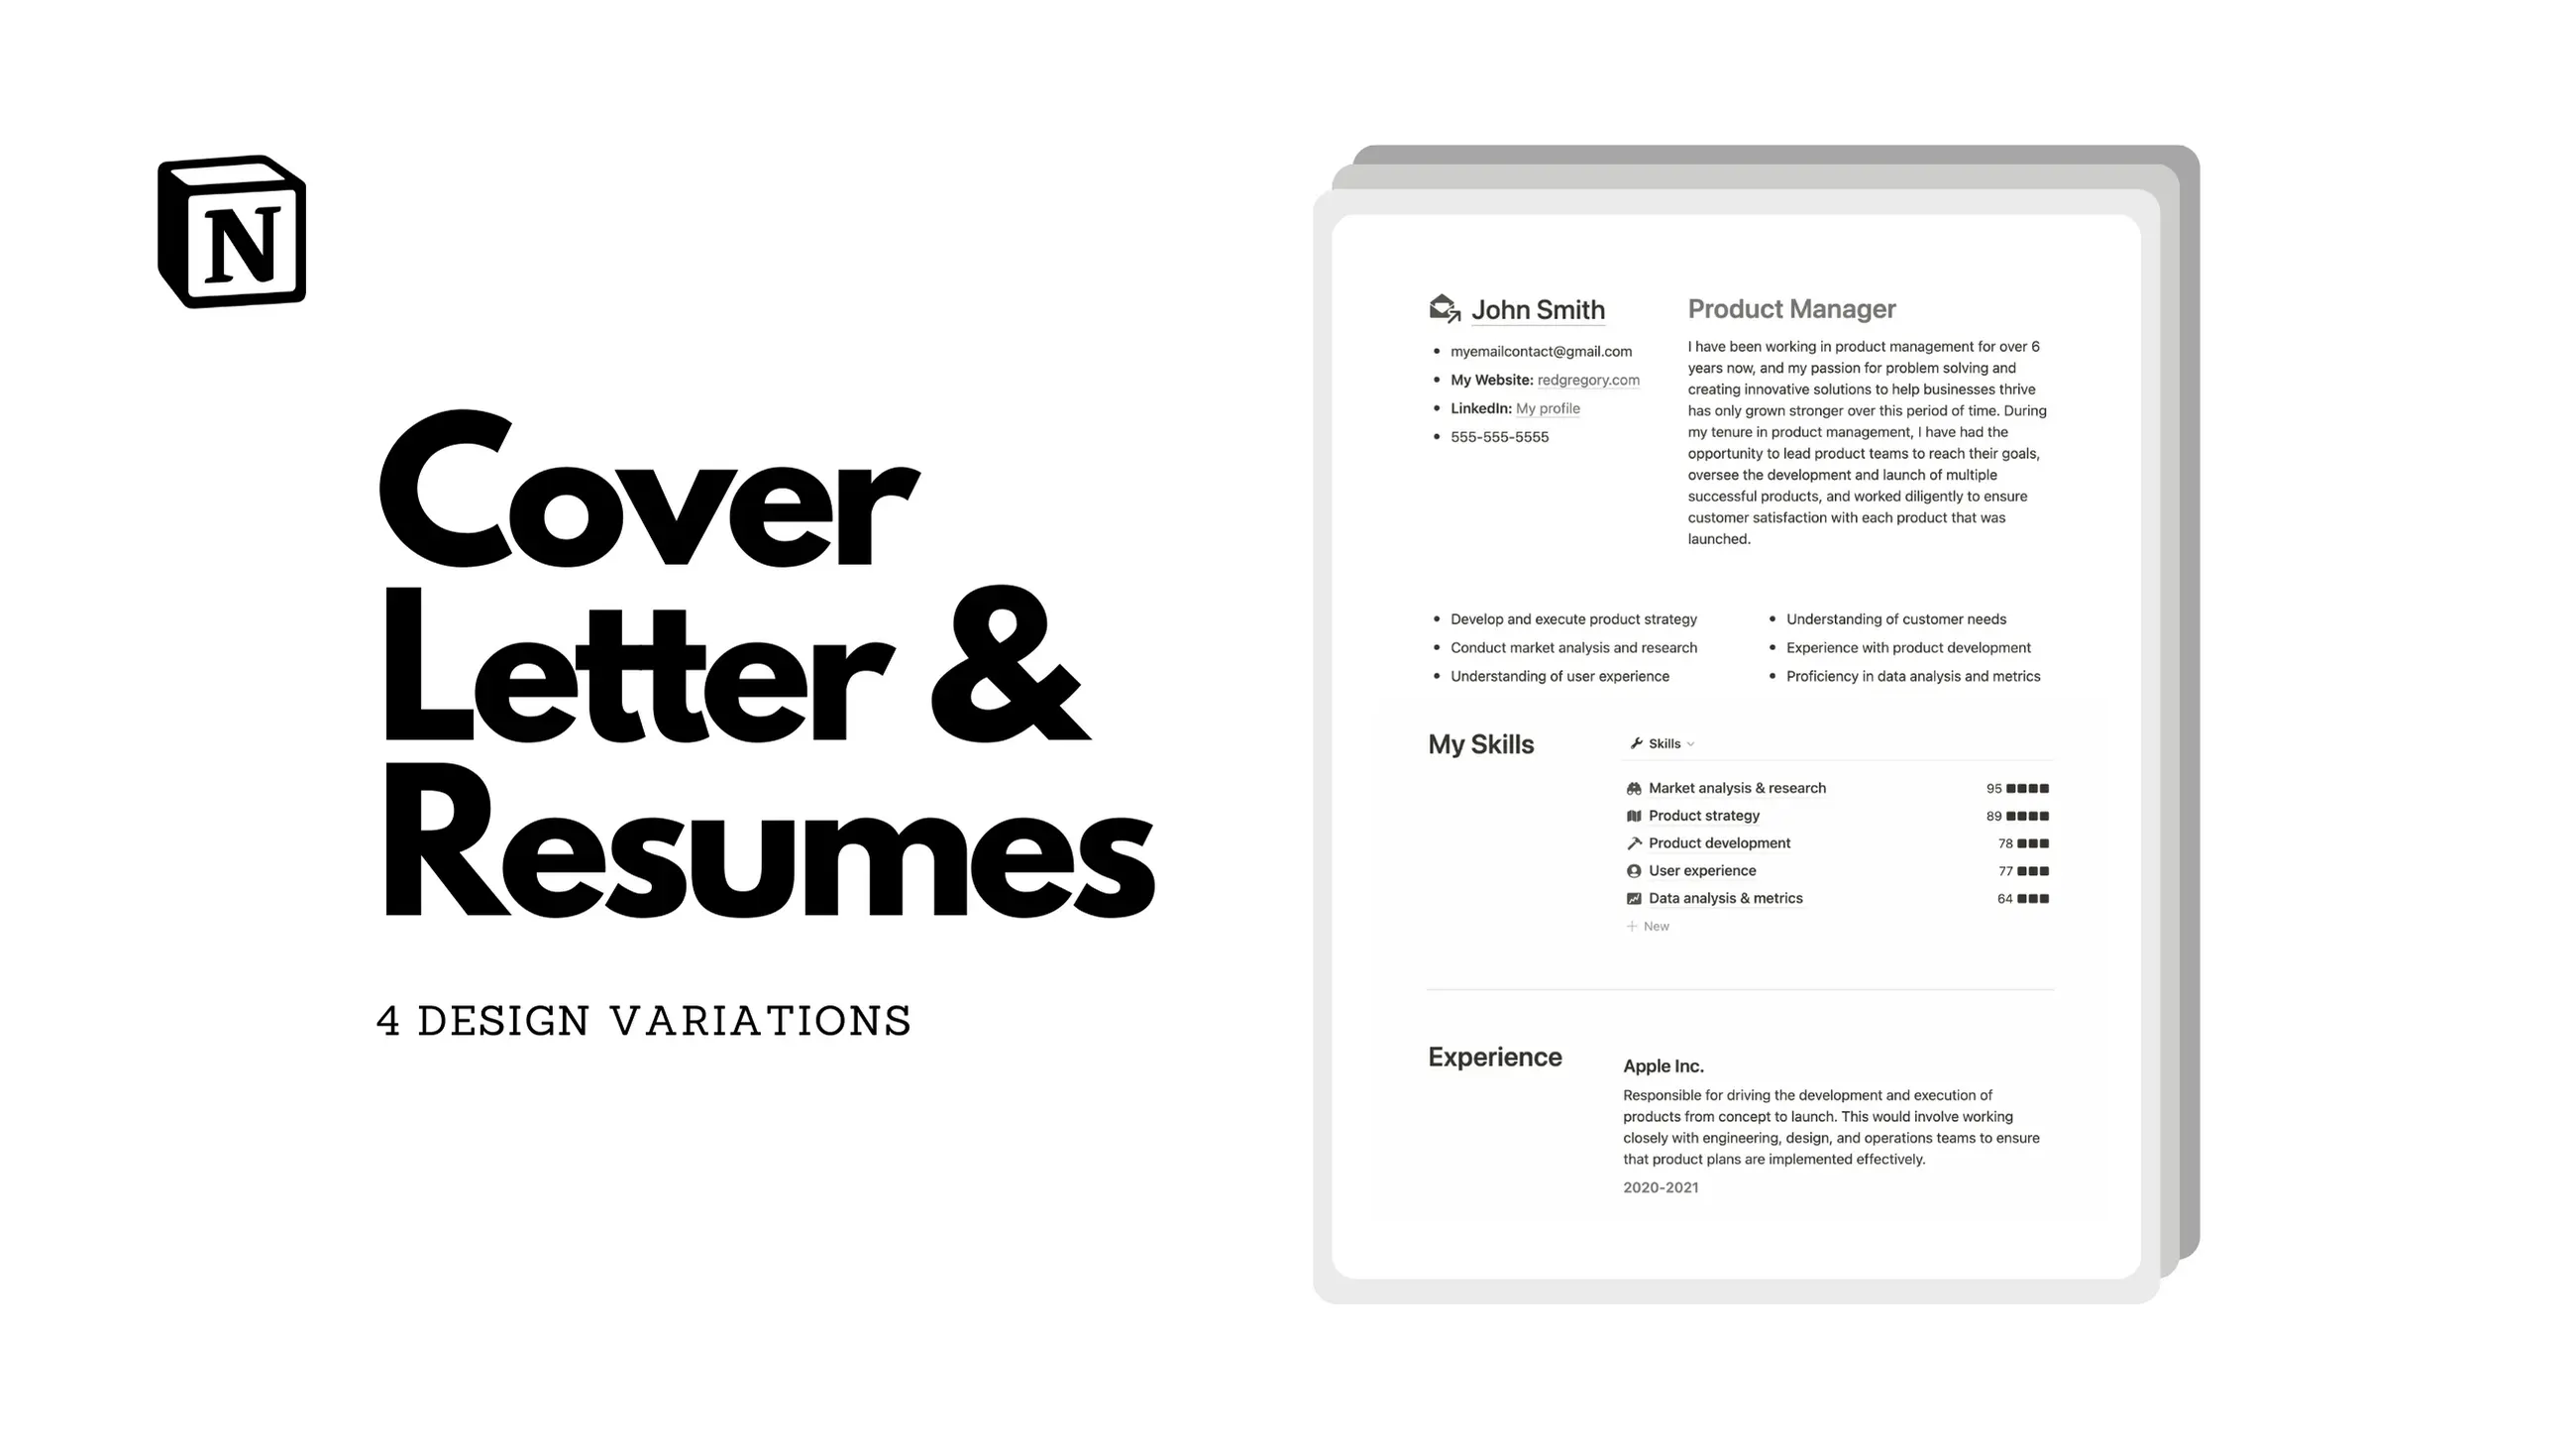 Cover Letter & Resumes image